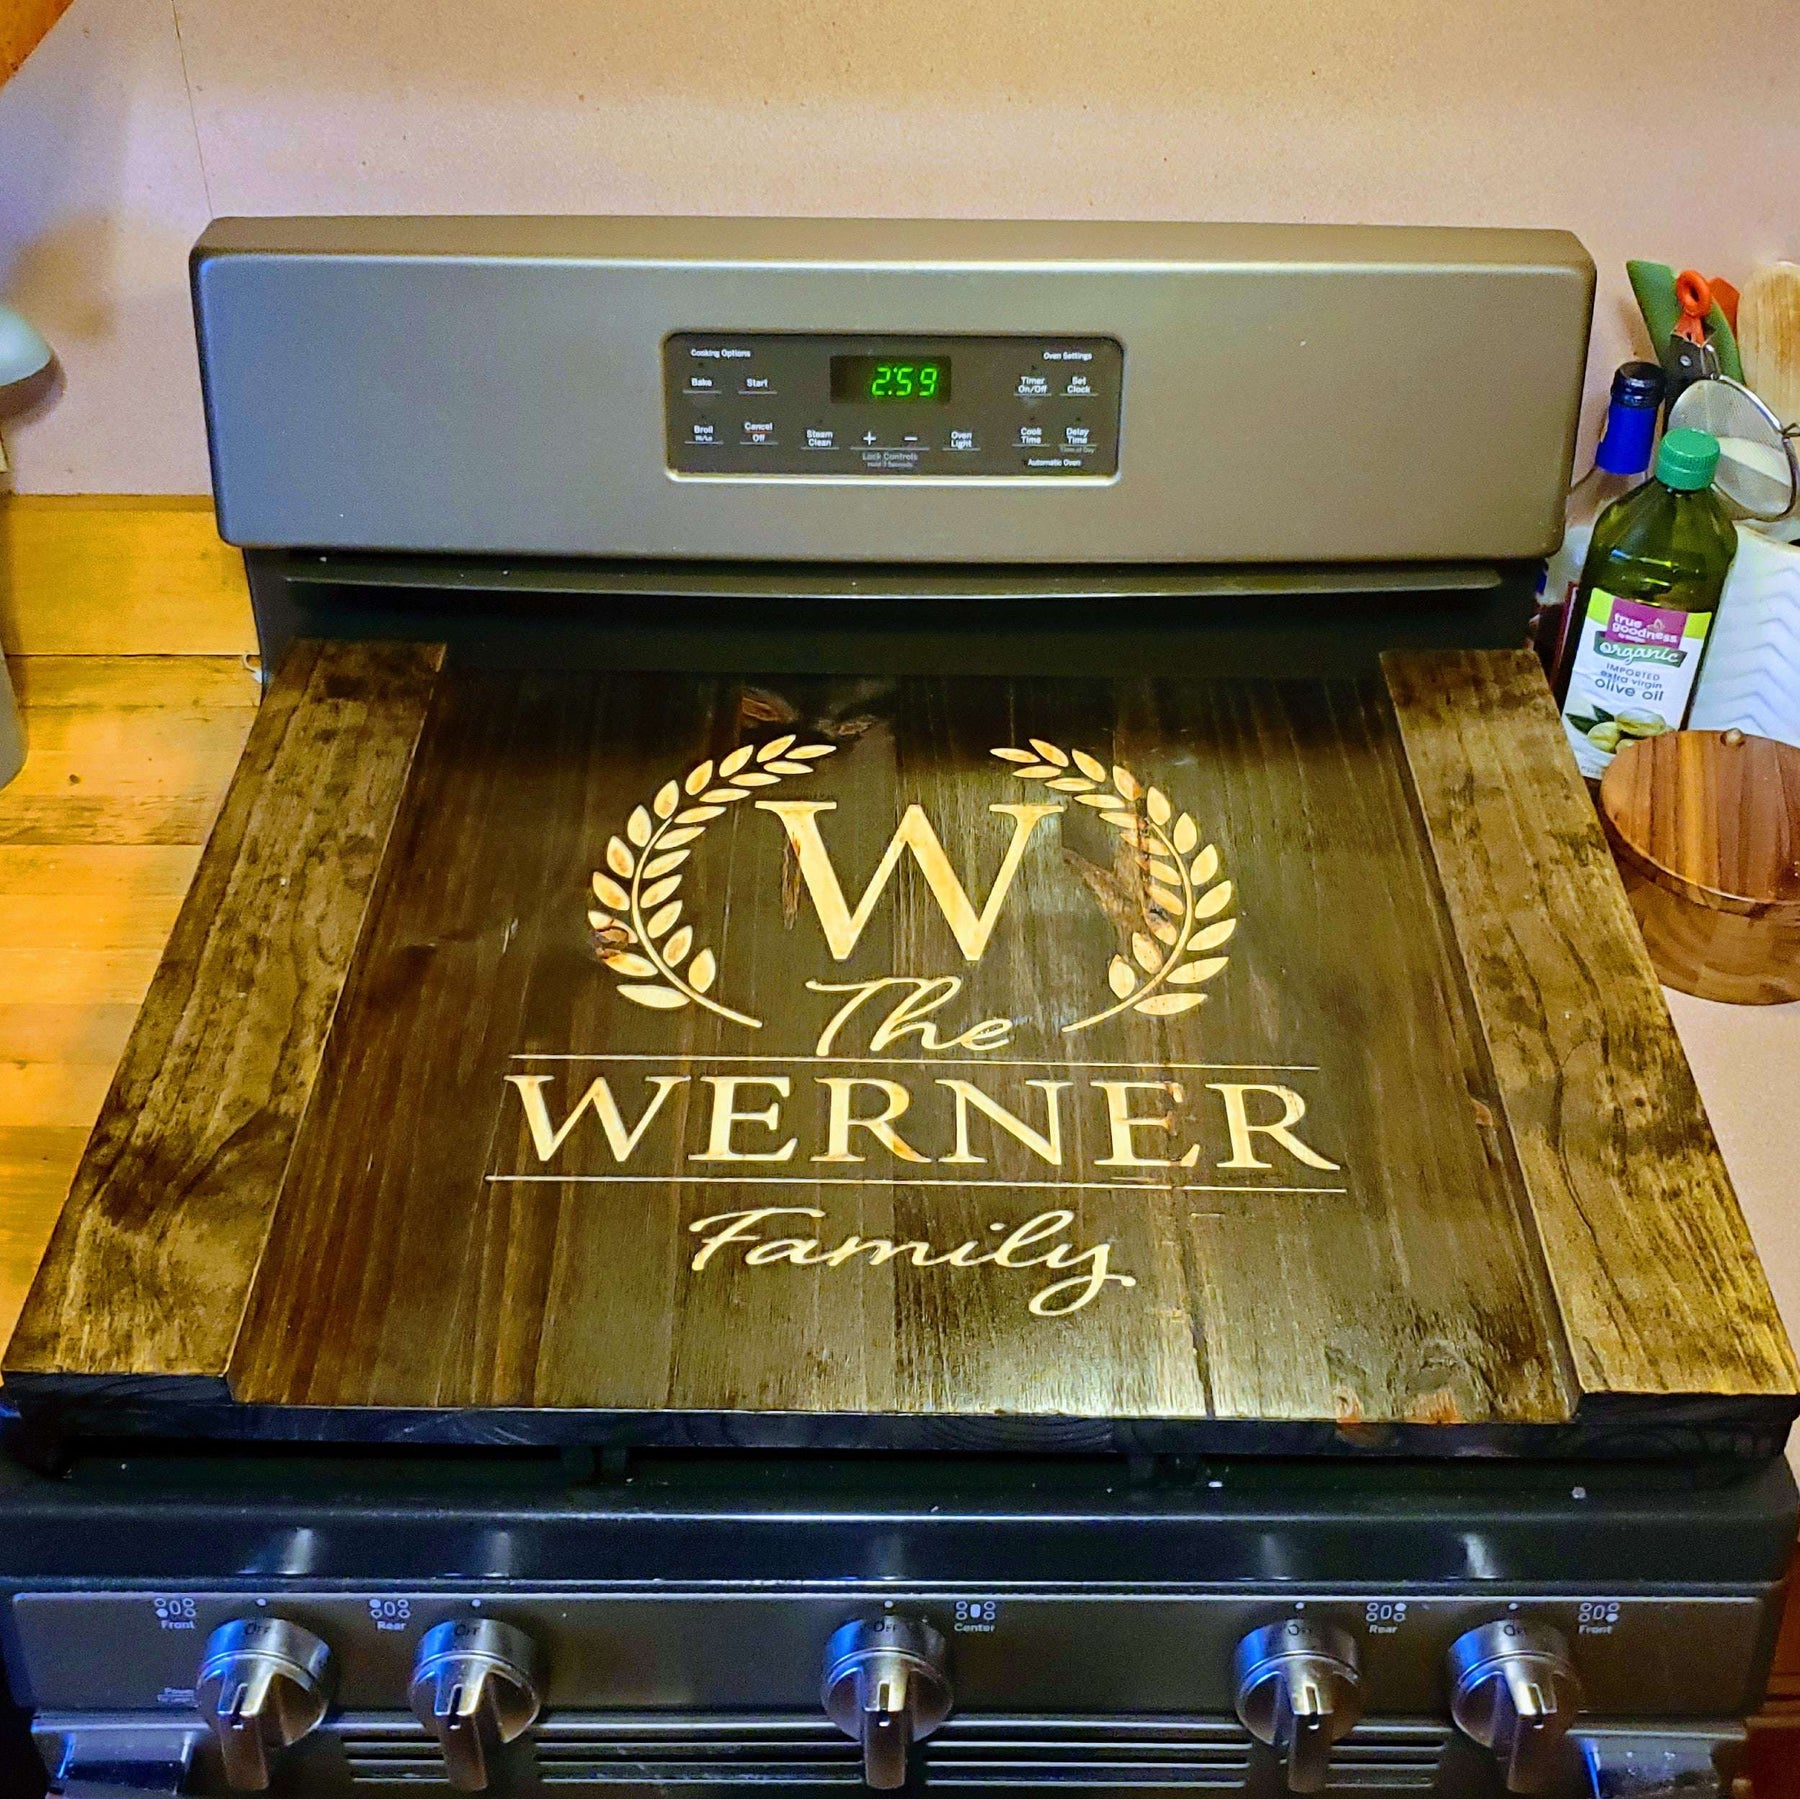 Personalized & Custom Wooden Stove Top Cover